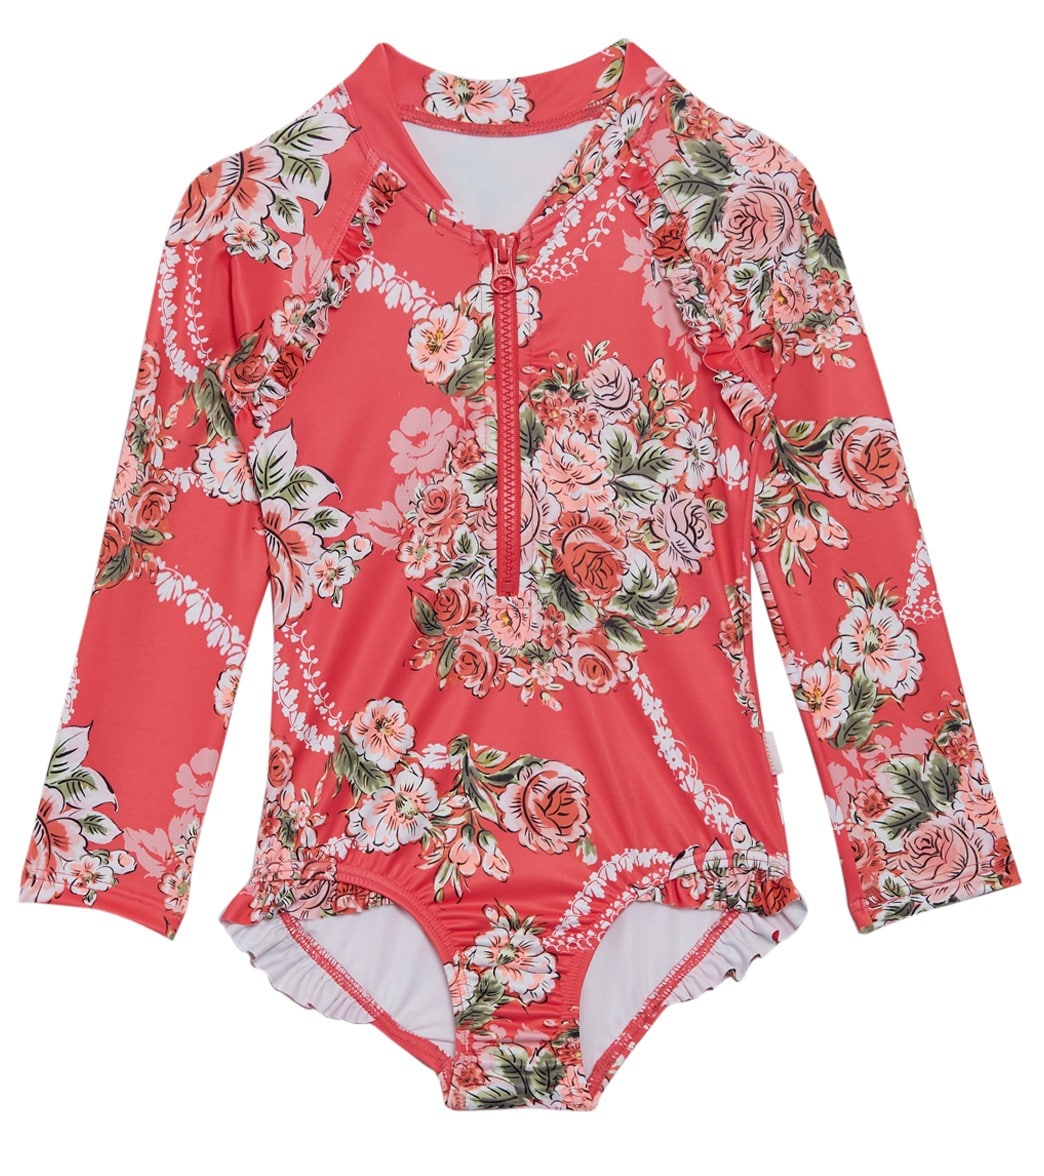 Seafolly Girls' Little Village In Como Long Sleeve Shirt Surf One Piece Swimsuit Baby Toddler Kid - Rose Pink 0 - Swimoutlet.com